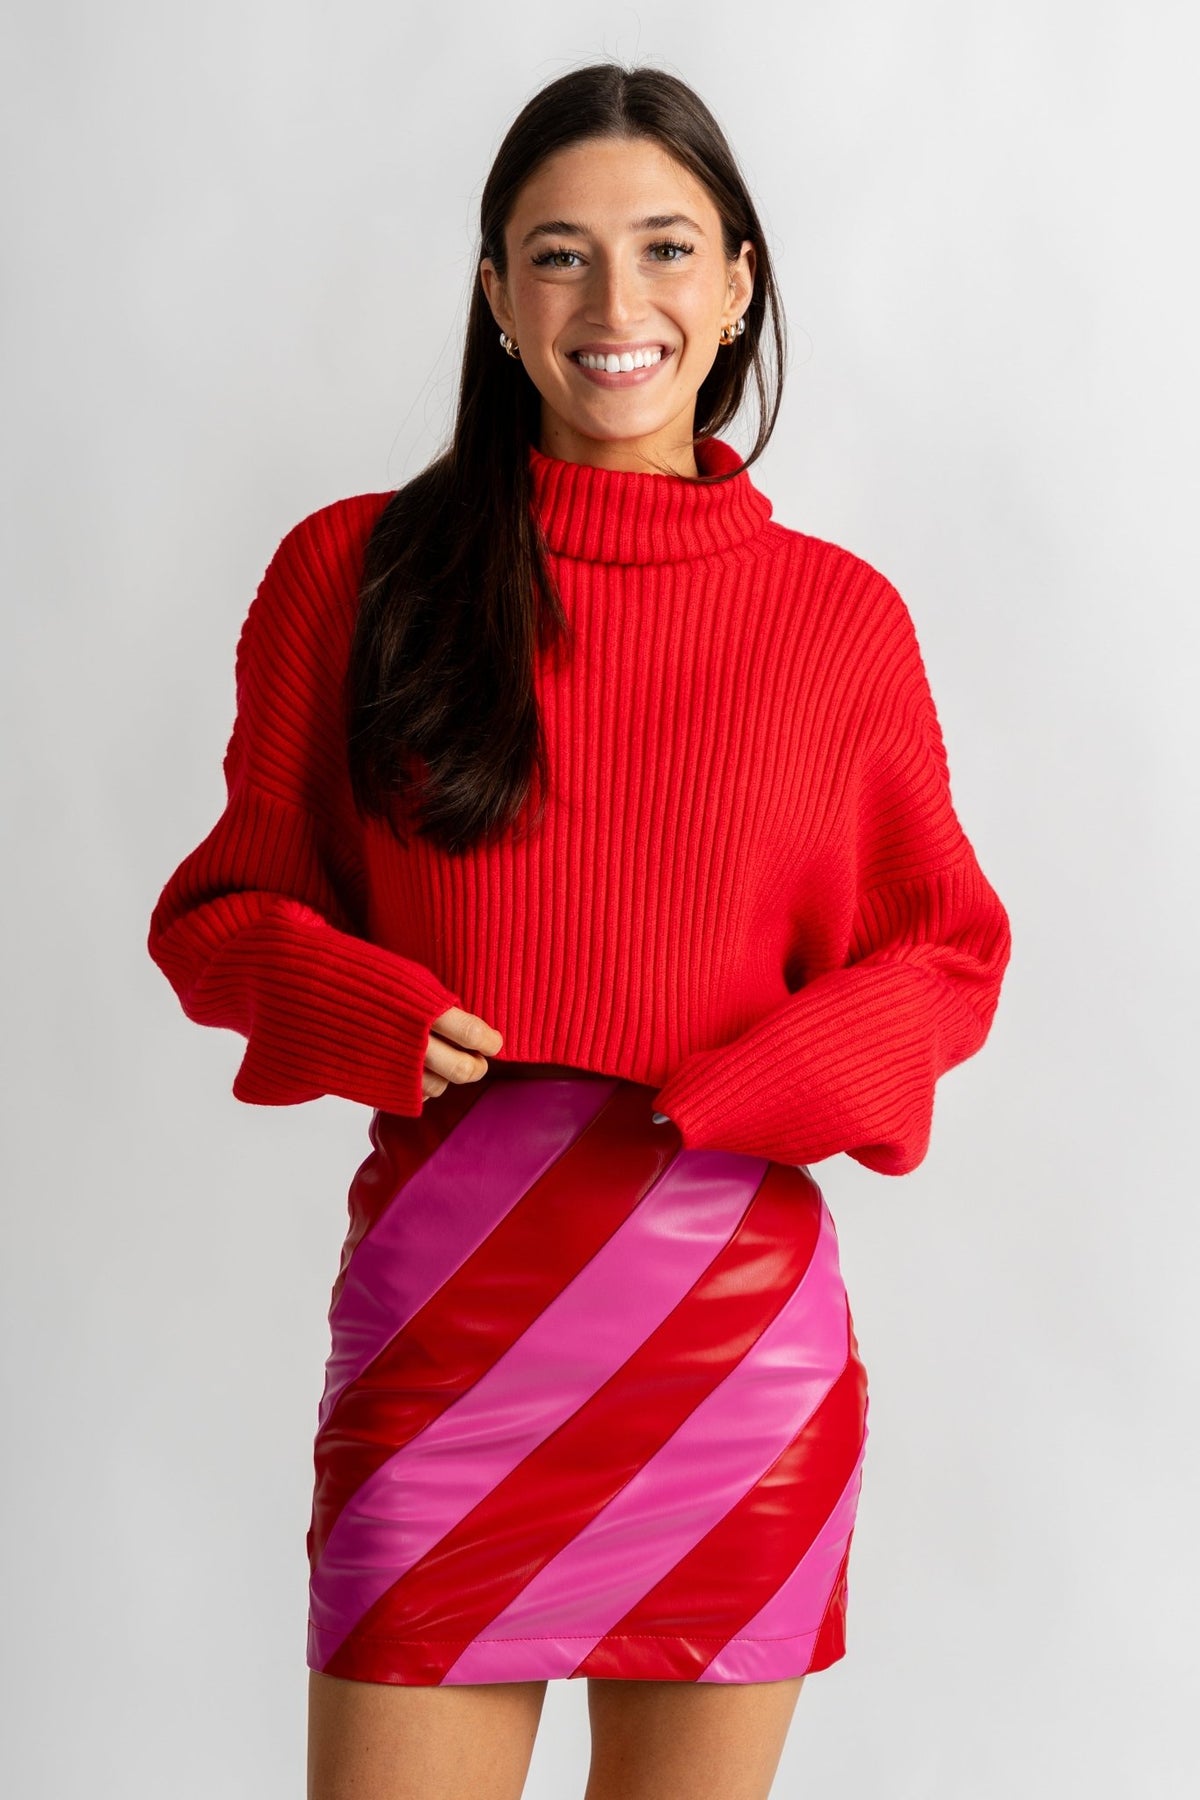 Cropped long sleeve sweater red - Trendy T-Shirts for Valentine's Day at Lush Fashion Lounge Boutique in Oklahoma City